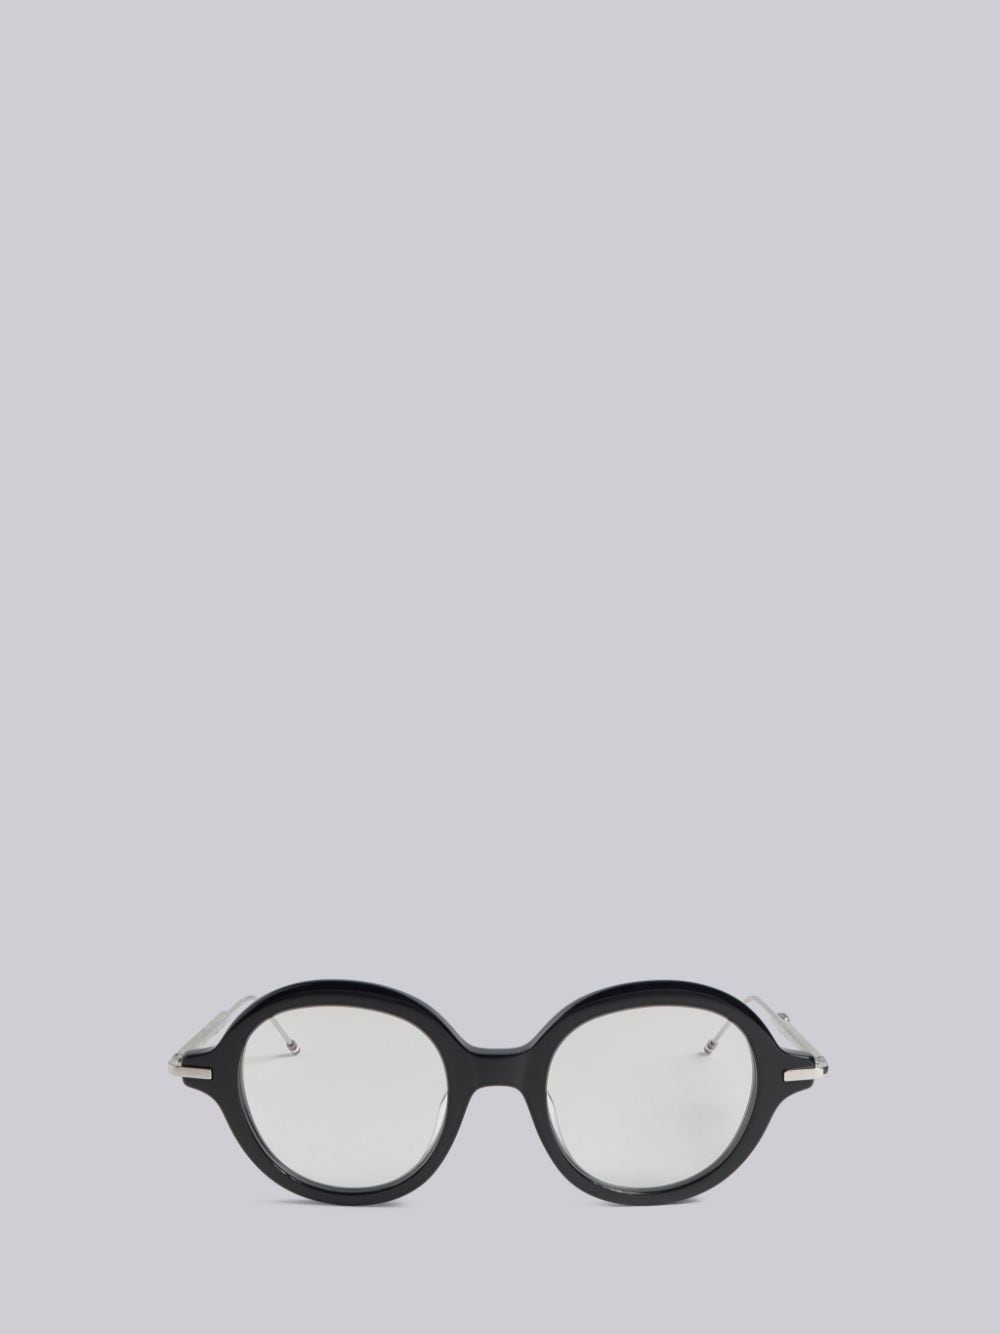 THOM BROWNE NAVY AND SILVER ROUND GLASSES